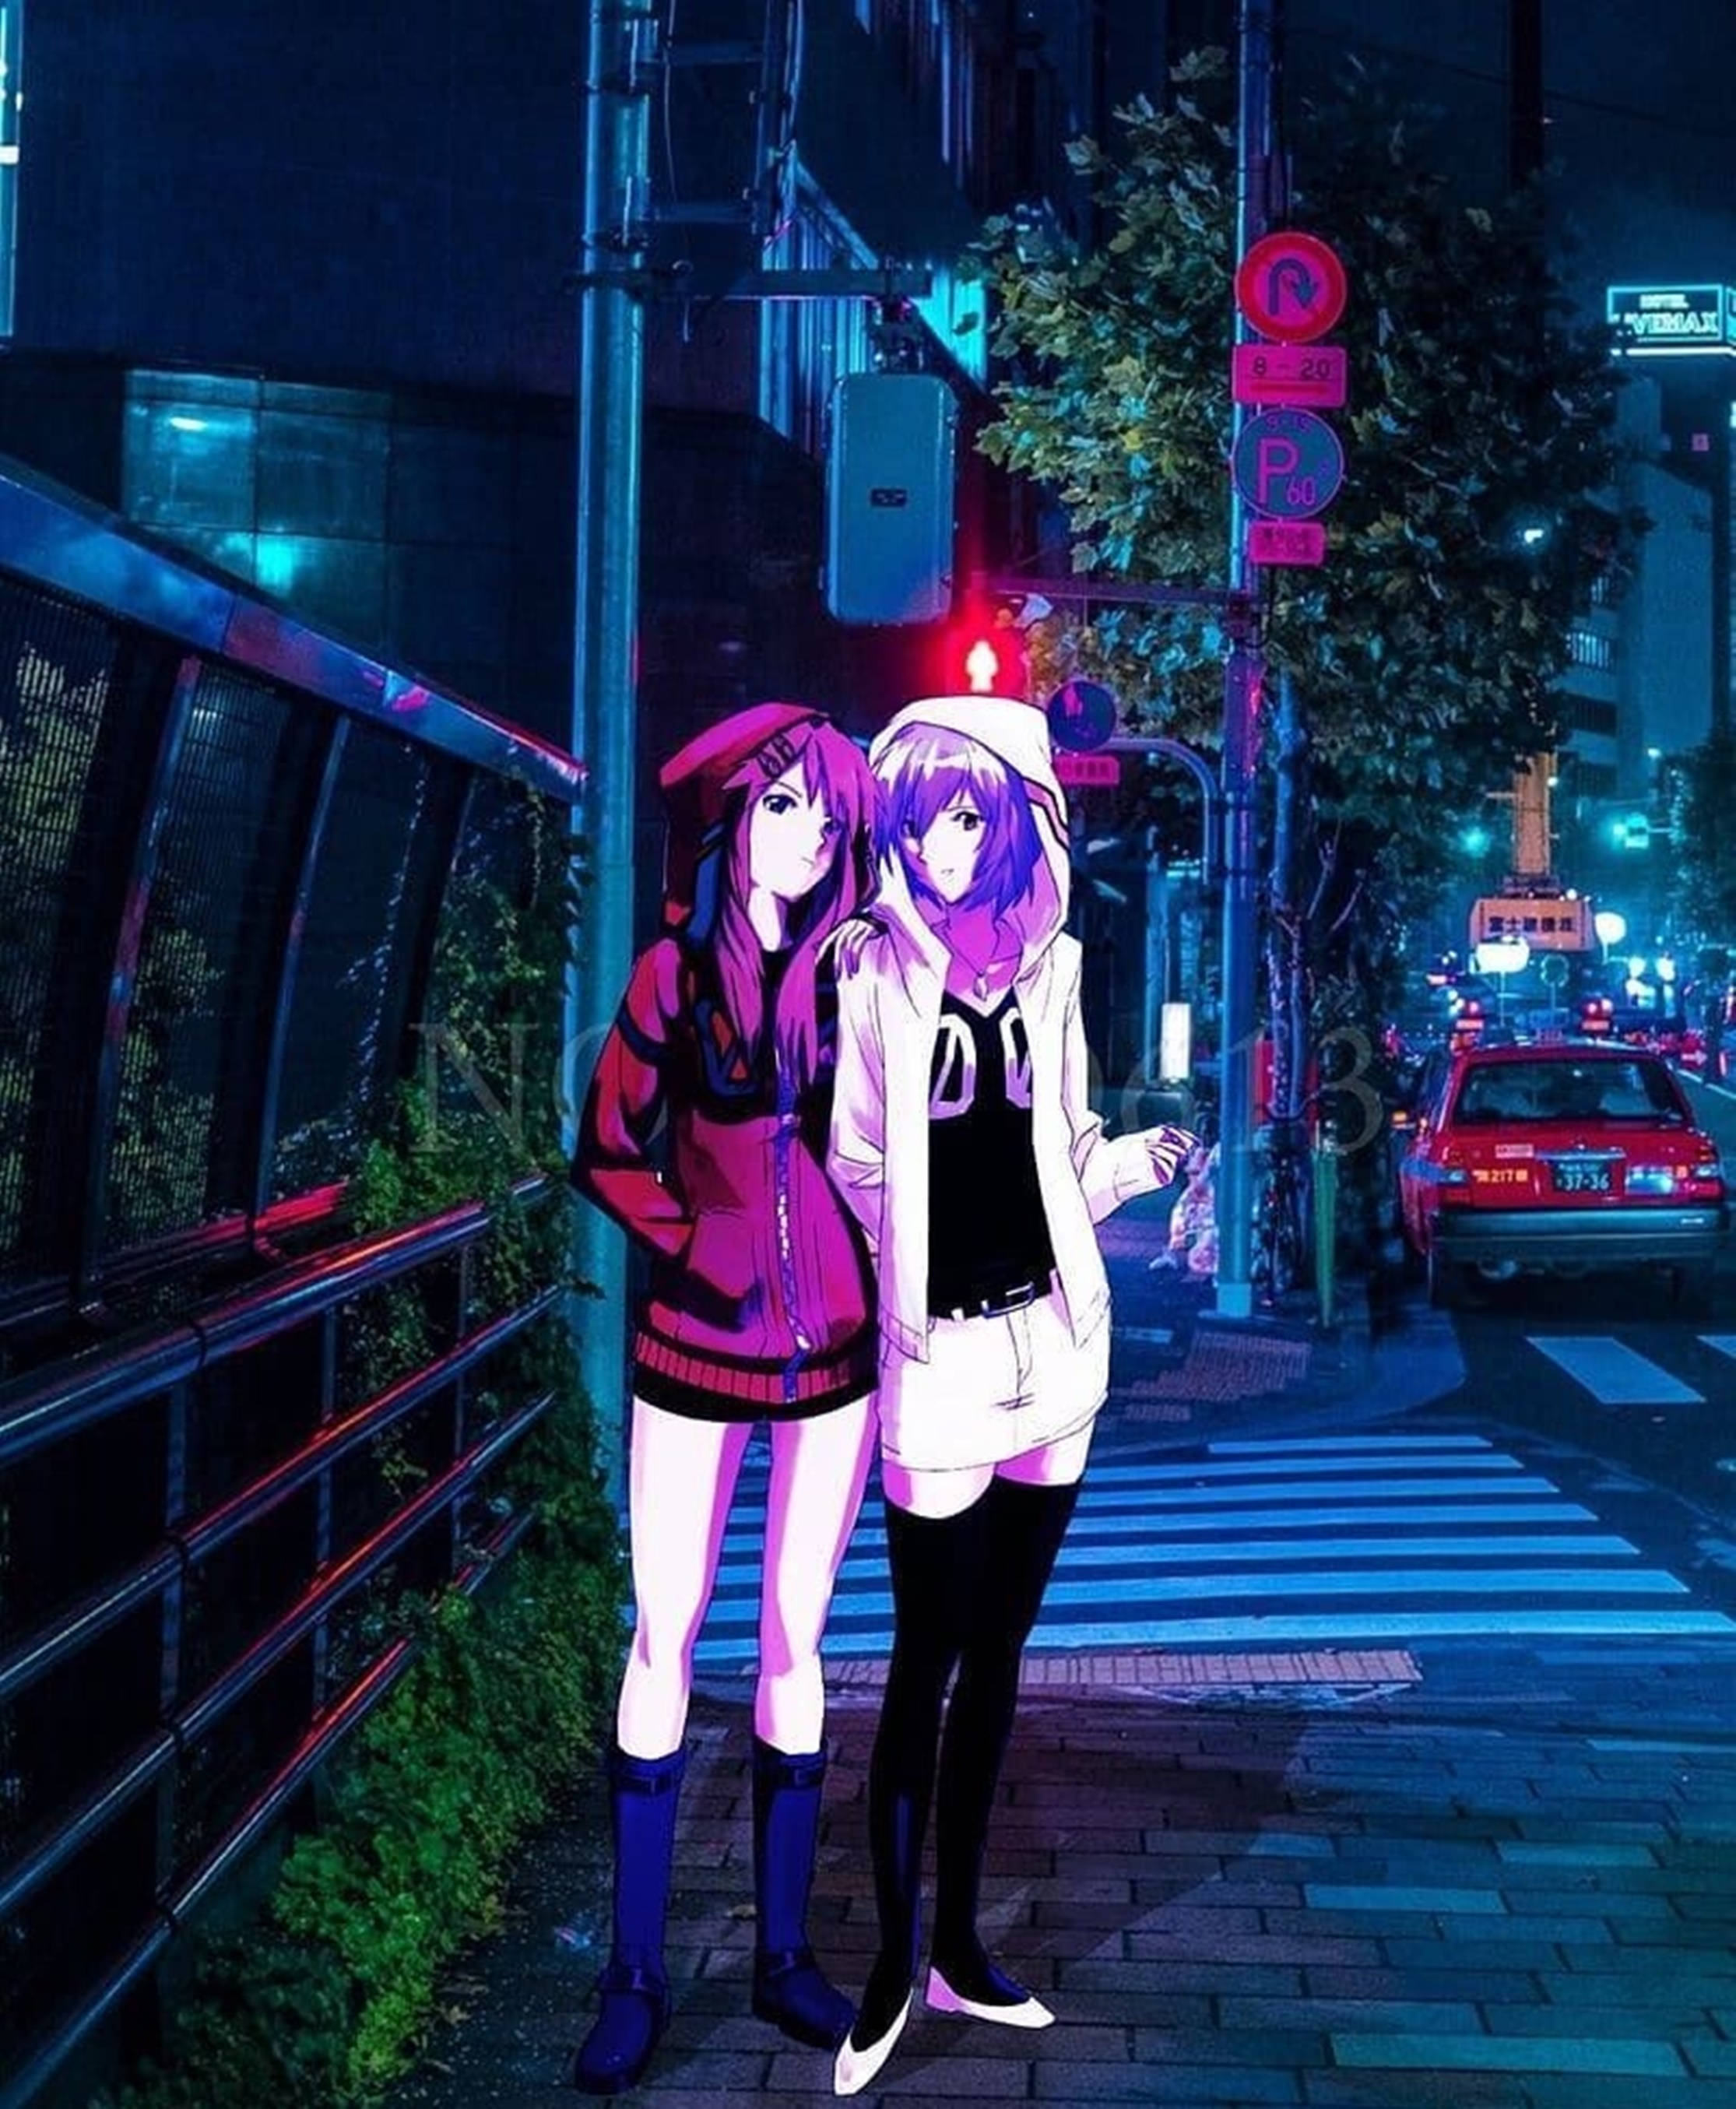 Download Anime Night City With Purple Sky Wallpaper | Wallpapers.com